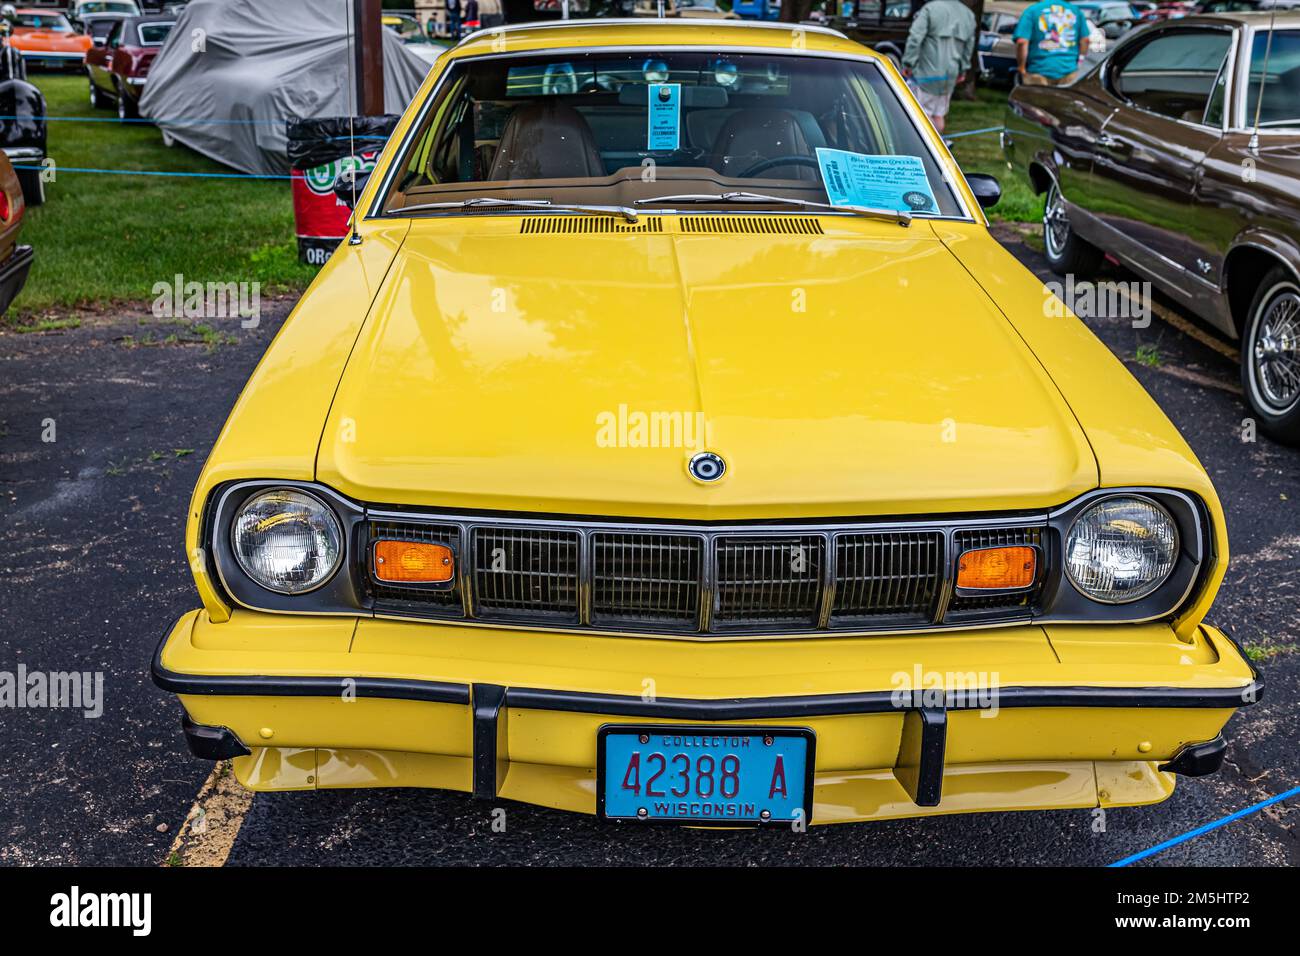 Iola, WI - July 07, 2022: High perspective front view of a 1977 AMC Hornet AMX Coupe at a local car show. Stock Photo